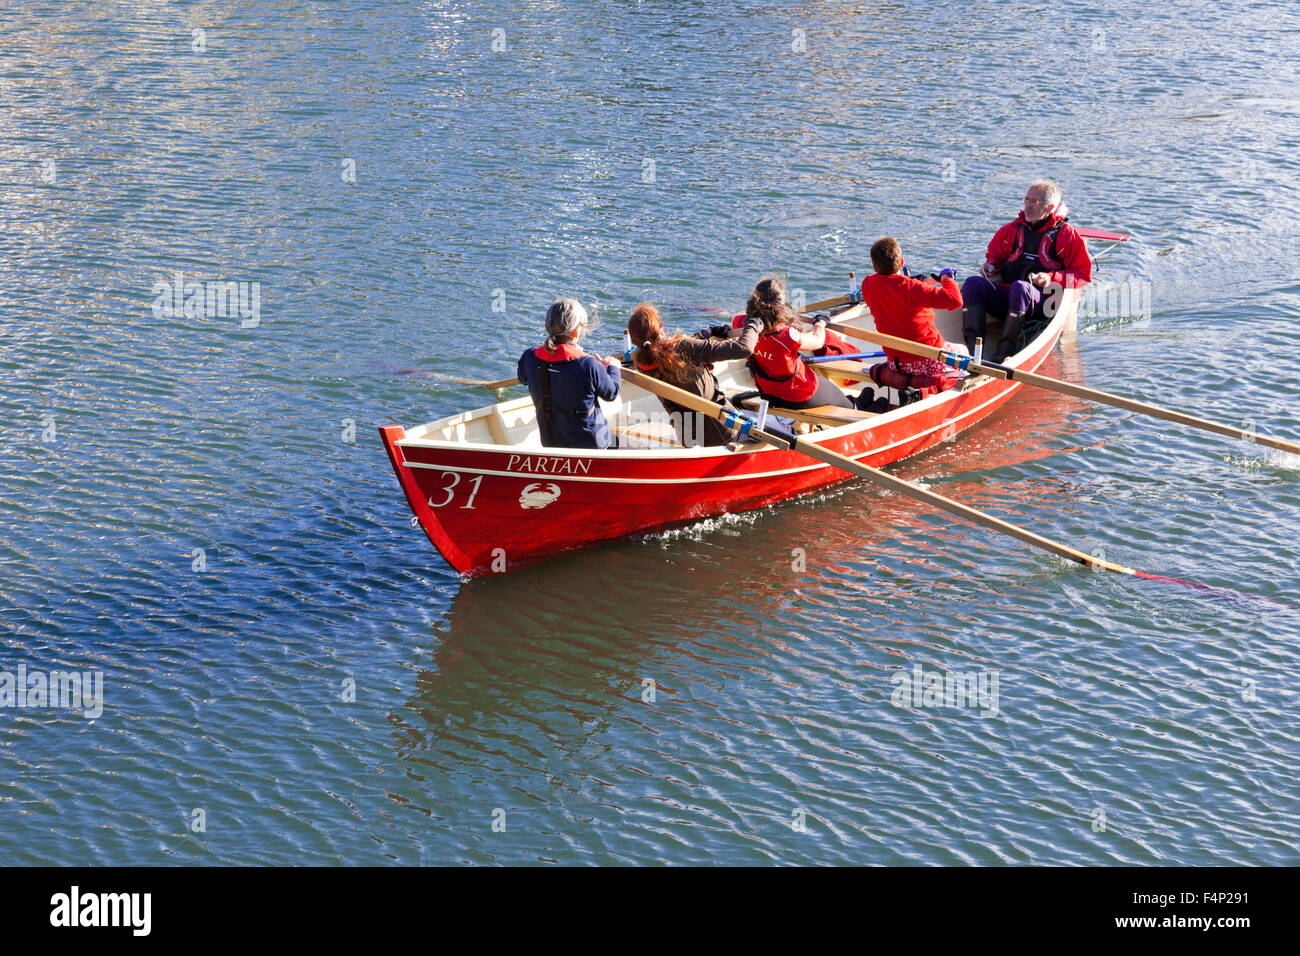 Crail Rowing Club in their coastal skiff Partan from the harbour in the small fishing village of Crail, Fife, Scotland UK Stock Photo